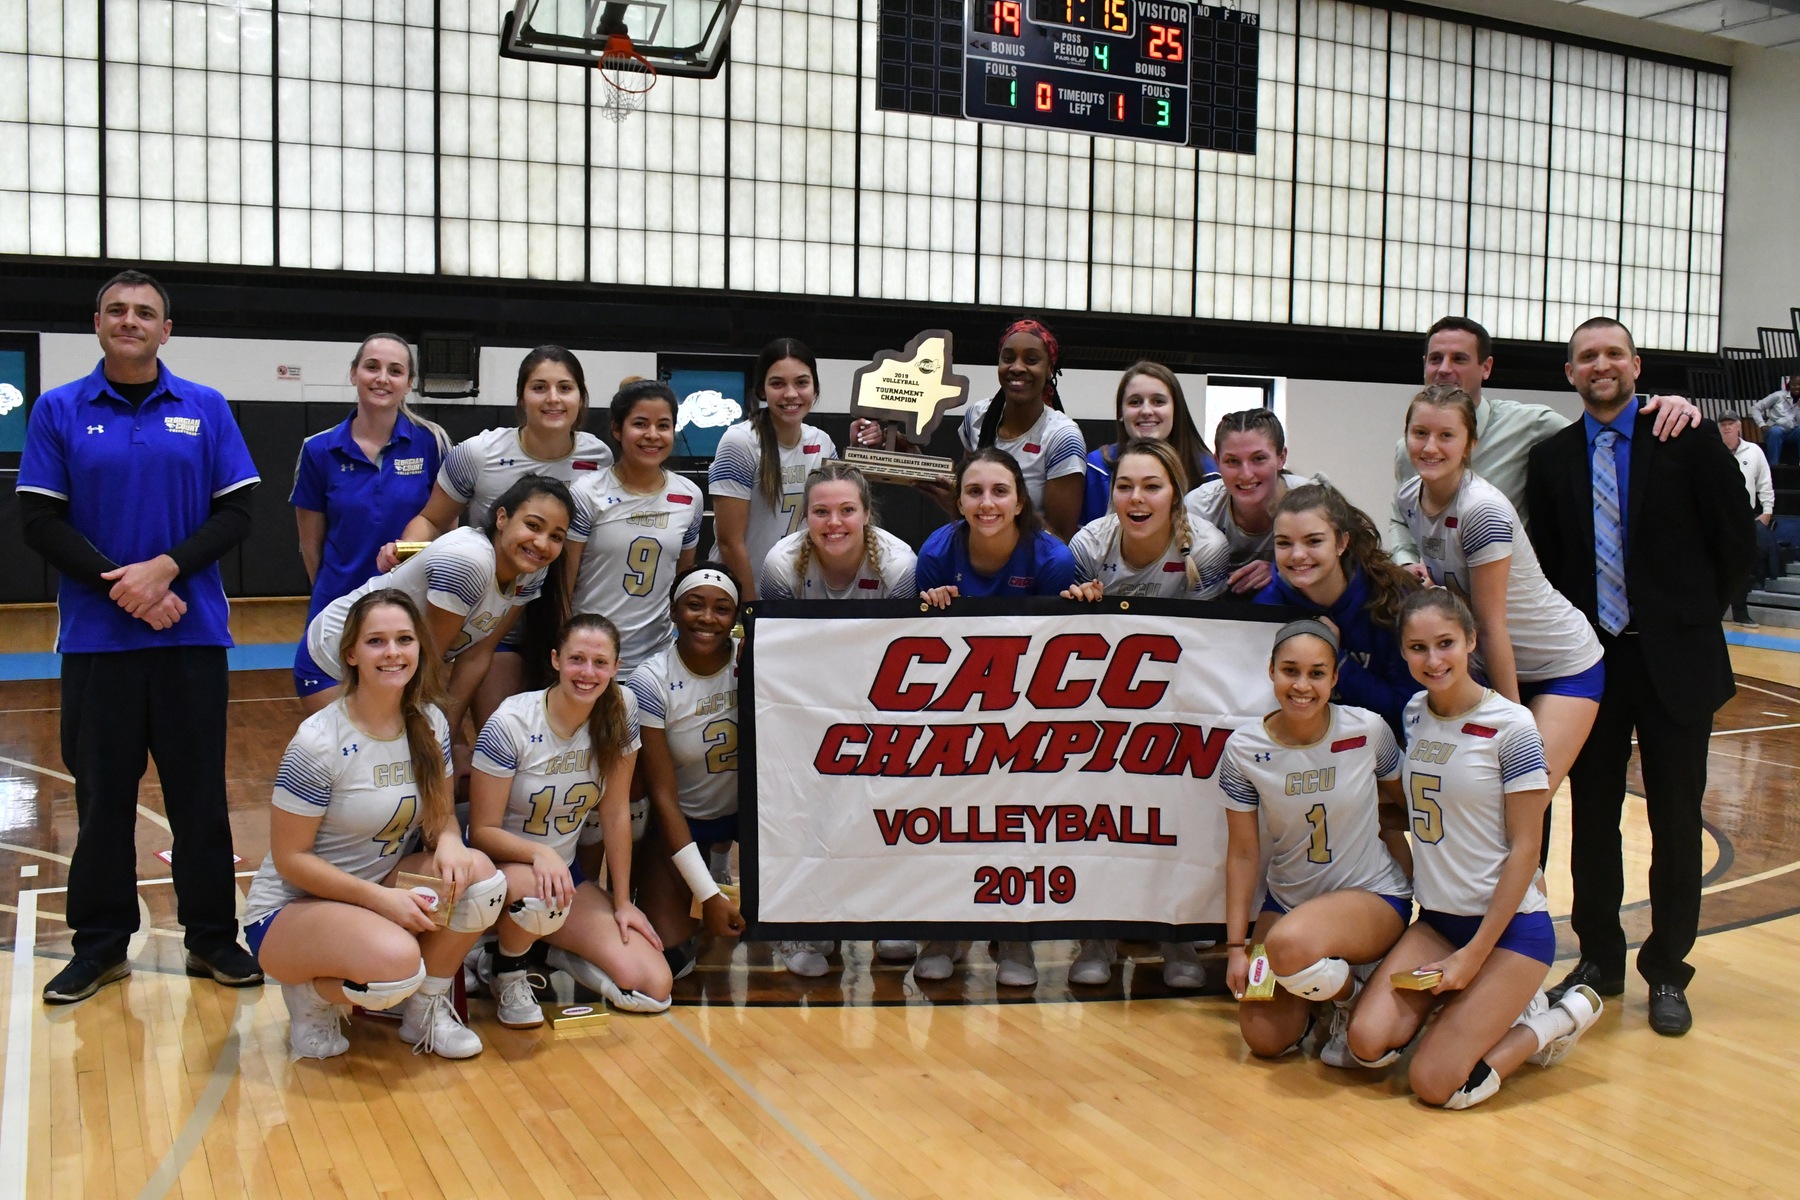 Georgian Court Downs Holy Family 3-1 to Win 2019 CACC Women's Volleyball Championship